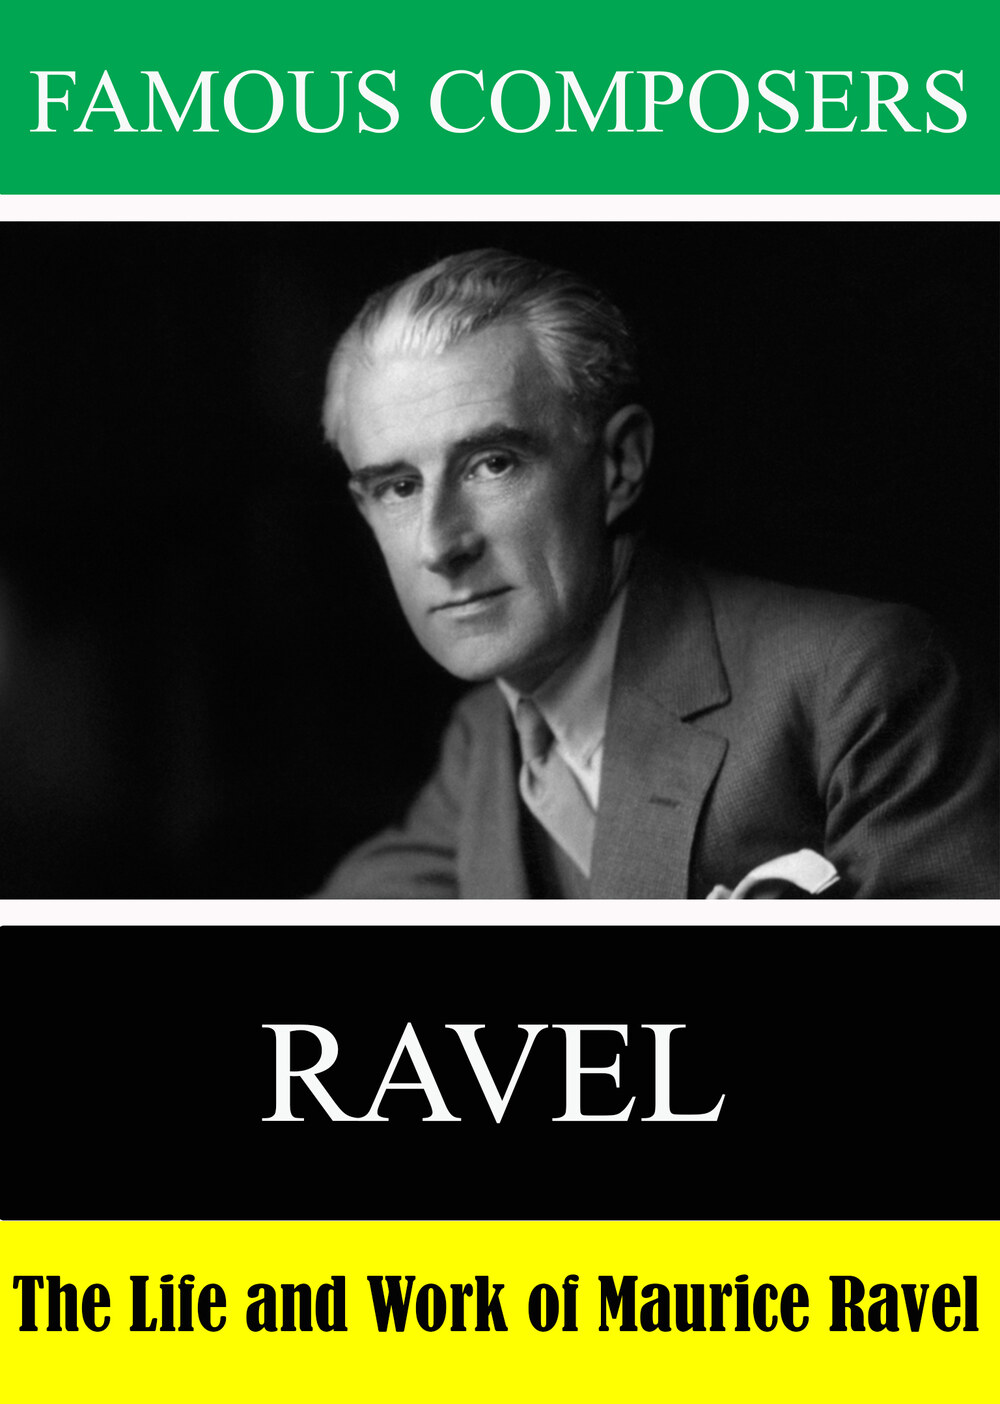 L7926 - Famous Composers: The Life and Work of Maurice Ravel